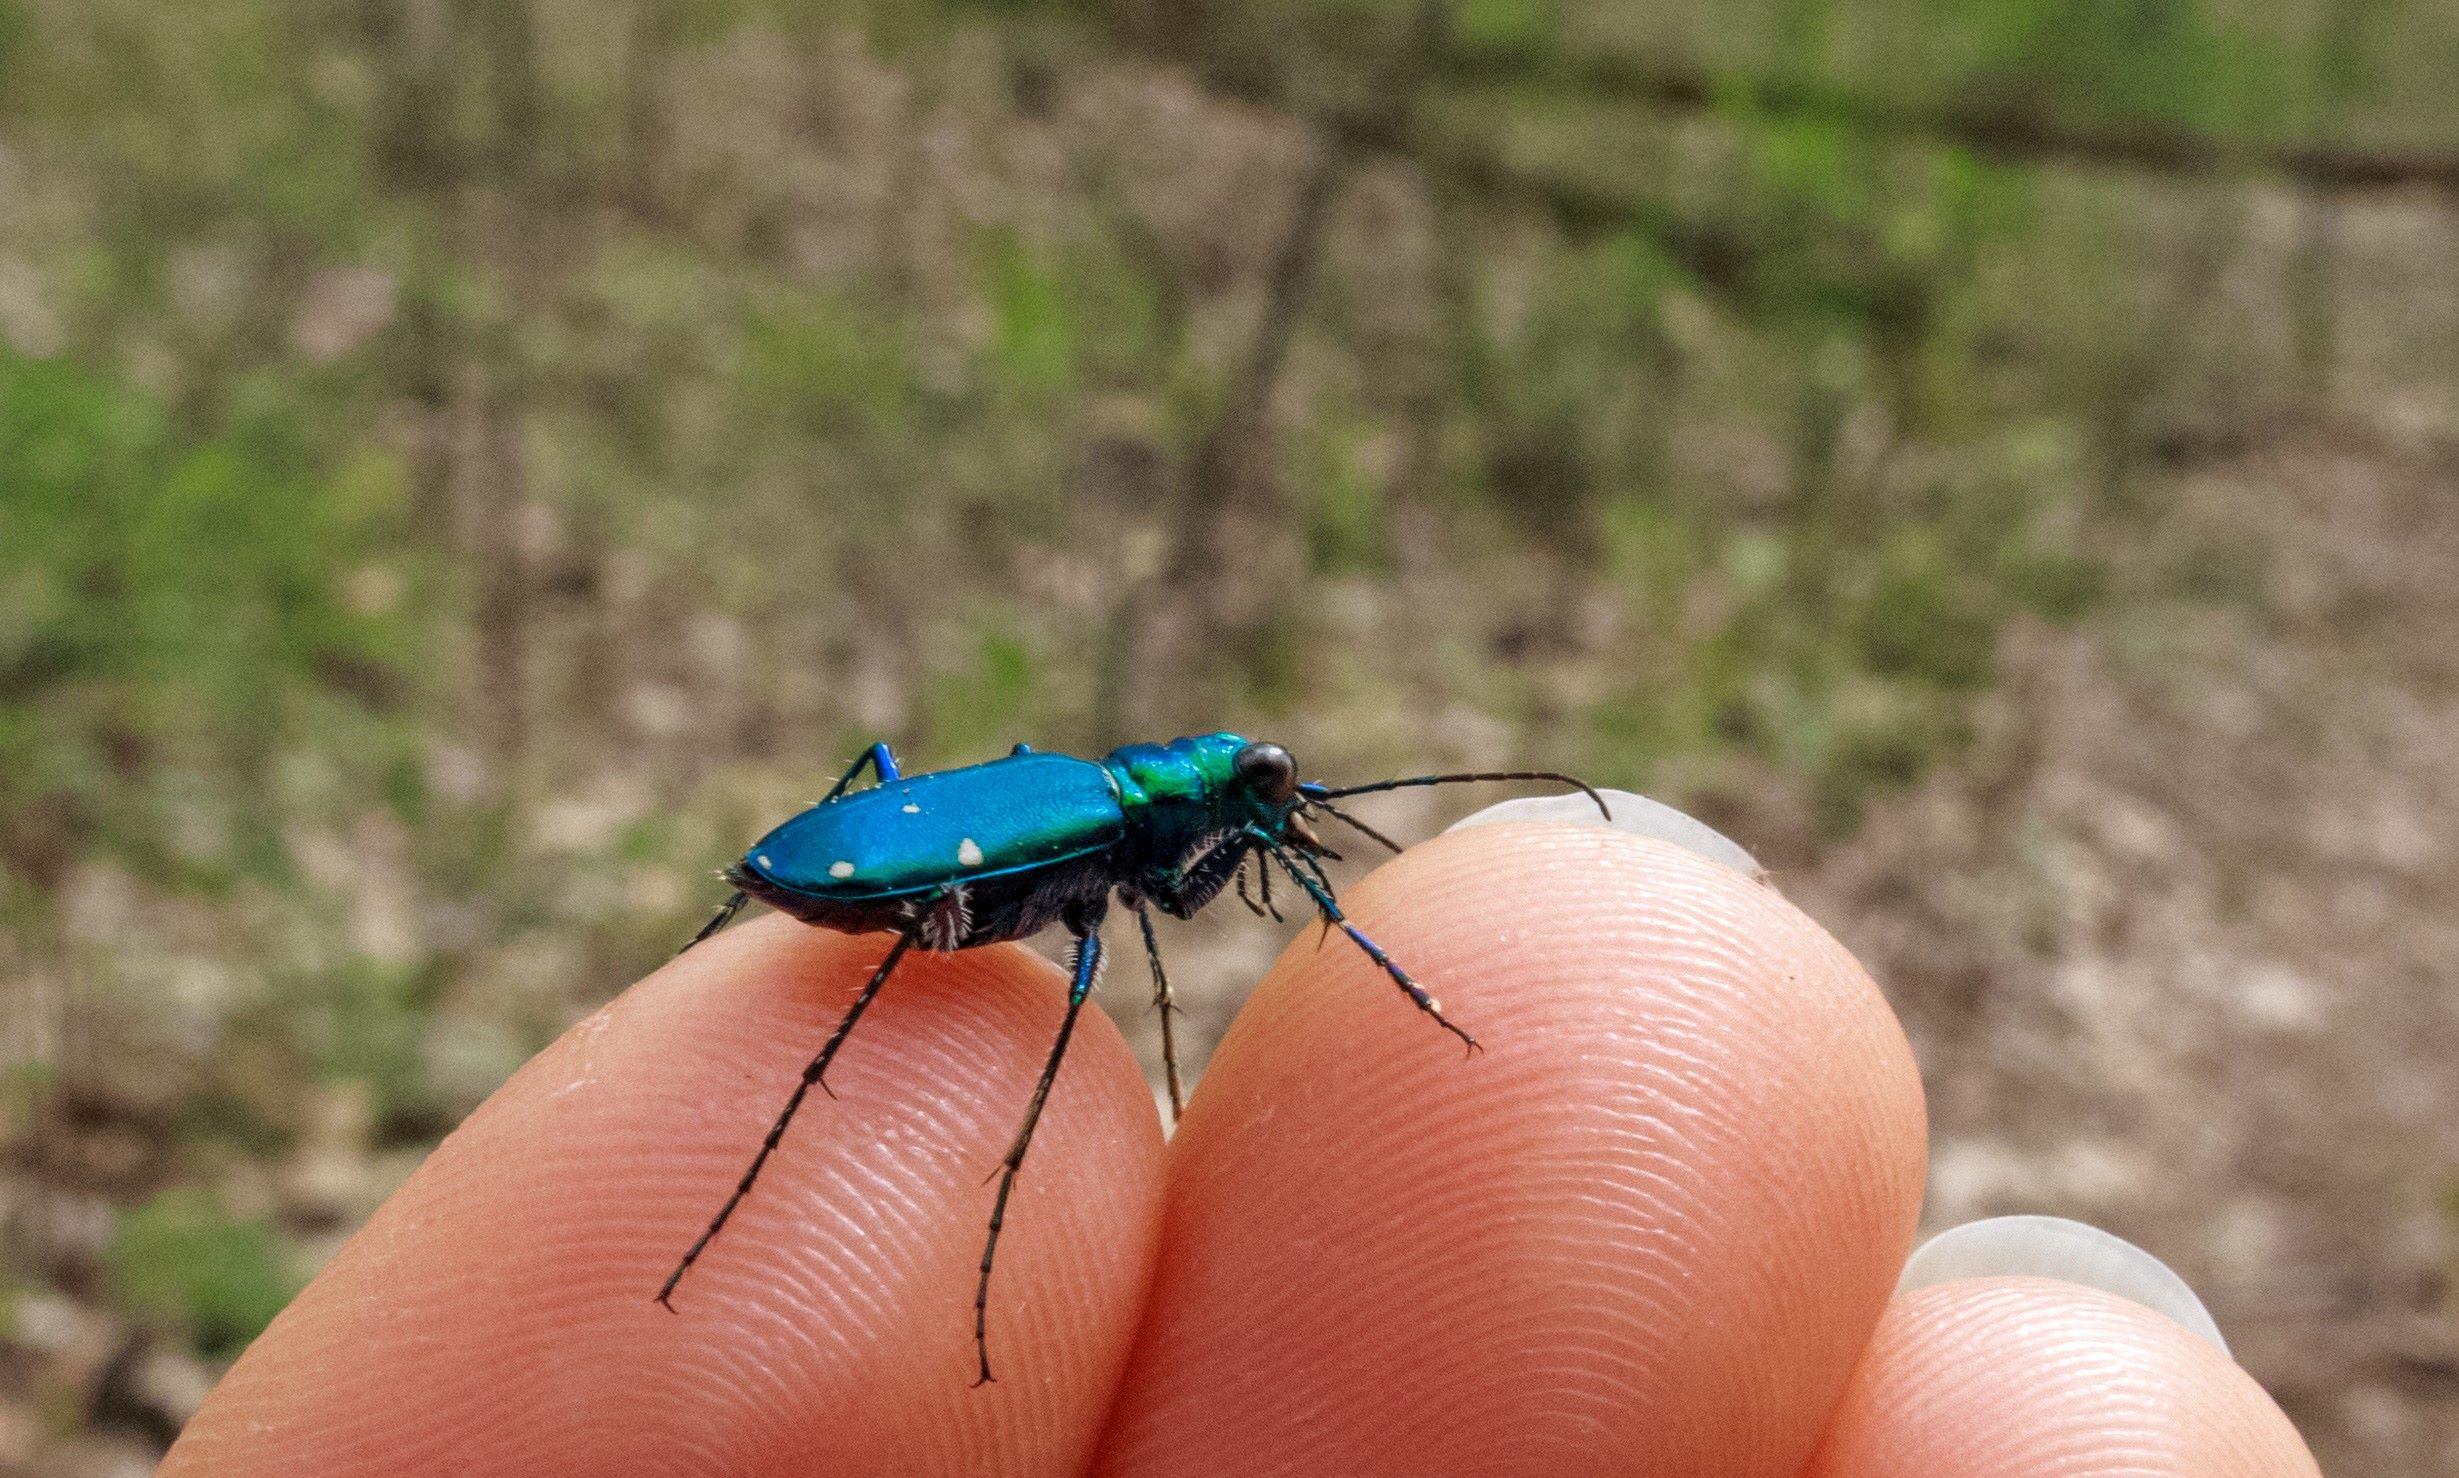 a green beetle with six white spots is resting on a human hand - this is a non-harmful insect